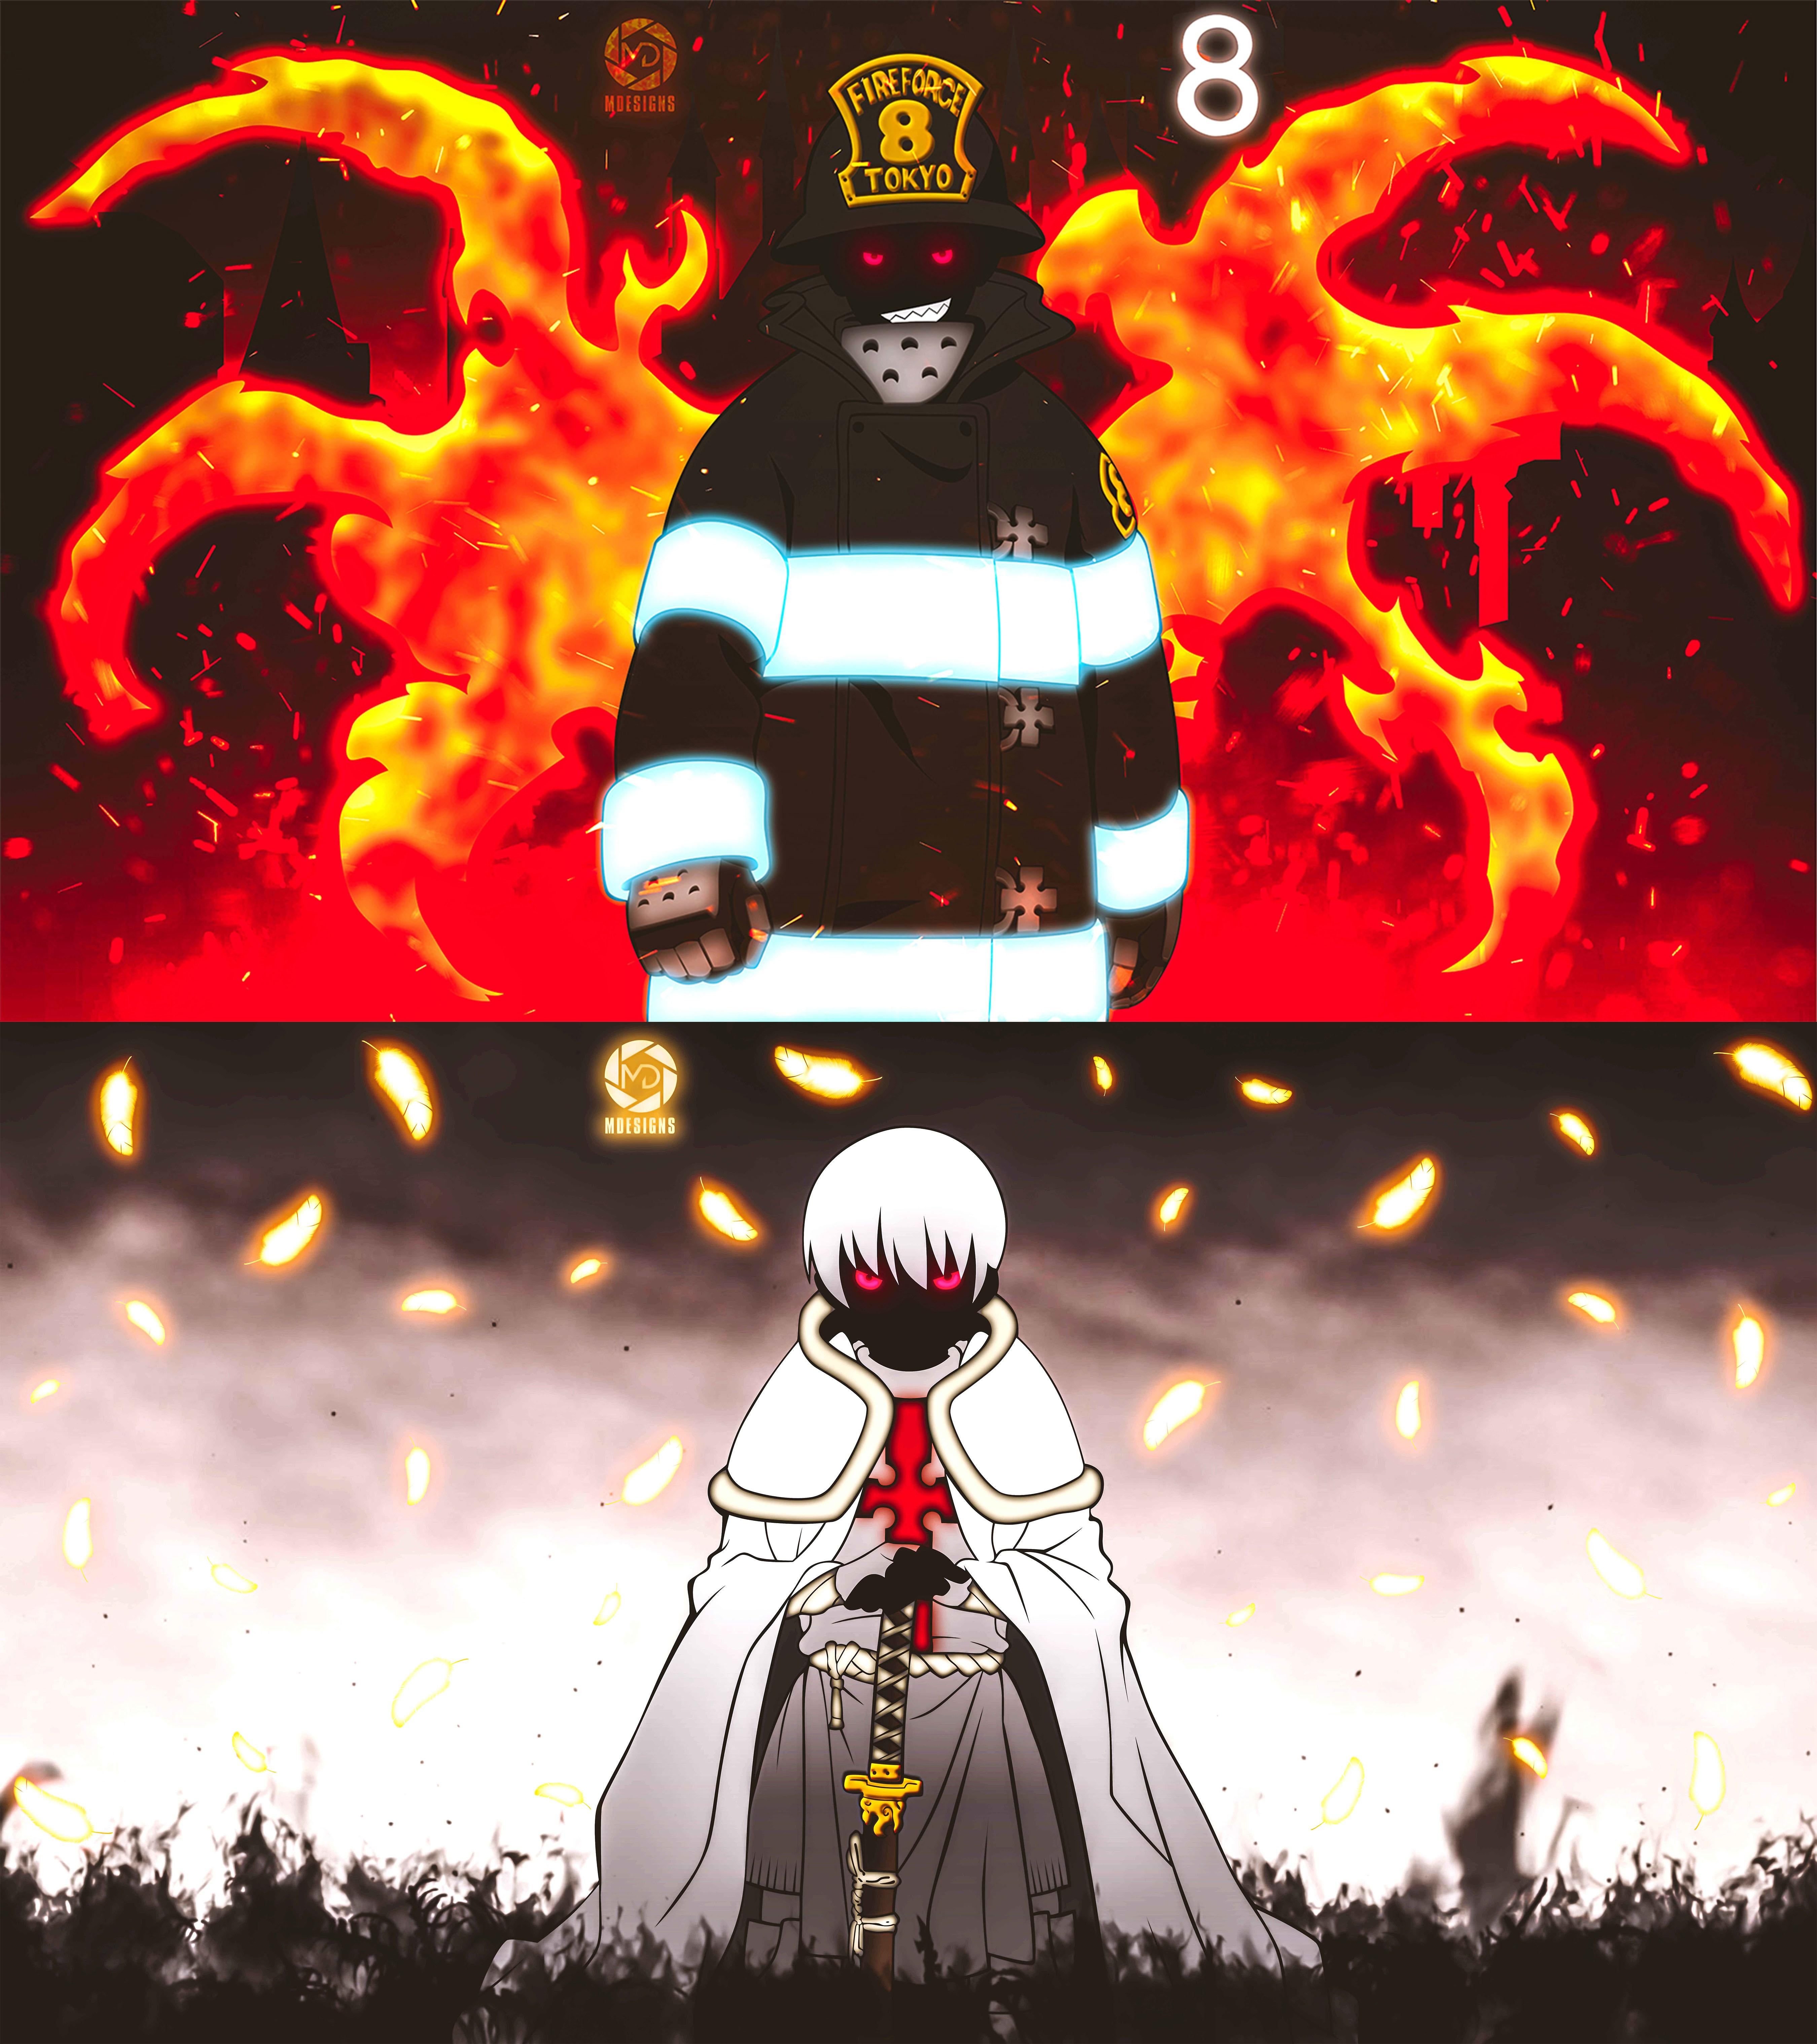 I made these wallpaper for Shinra and Sho from Fire Force: firebrigade